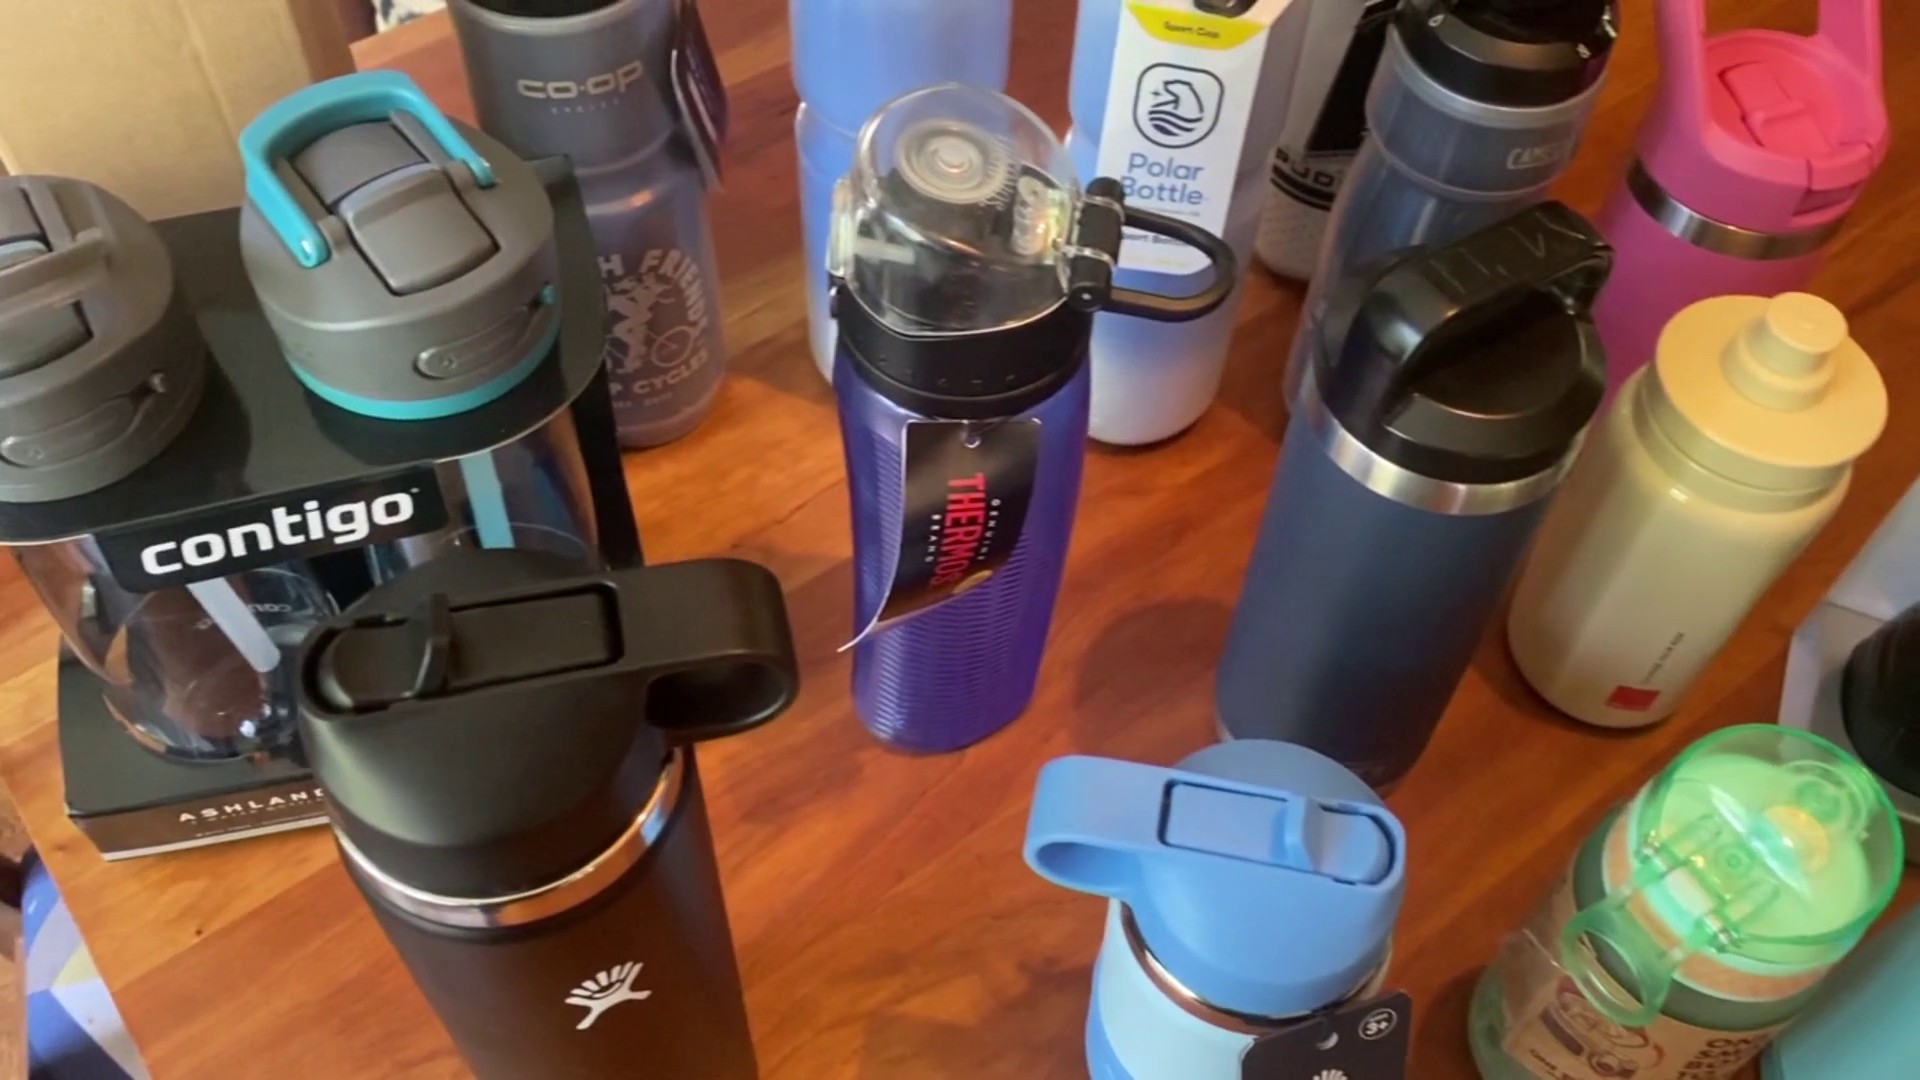 The best reusable water bottle deals from Contigo, Yeti, Hydro